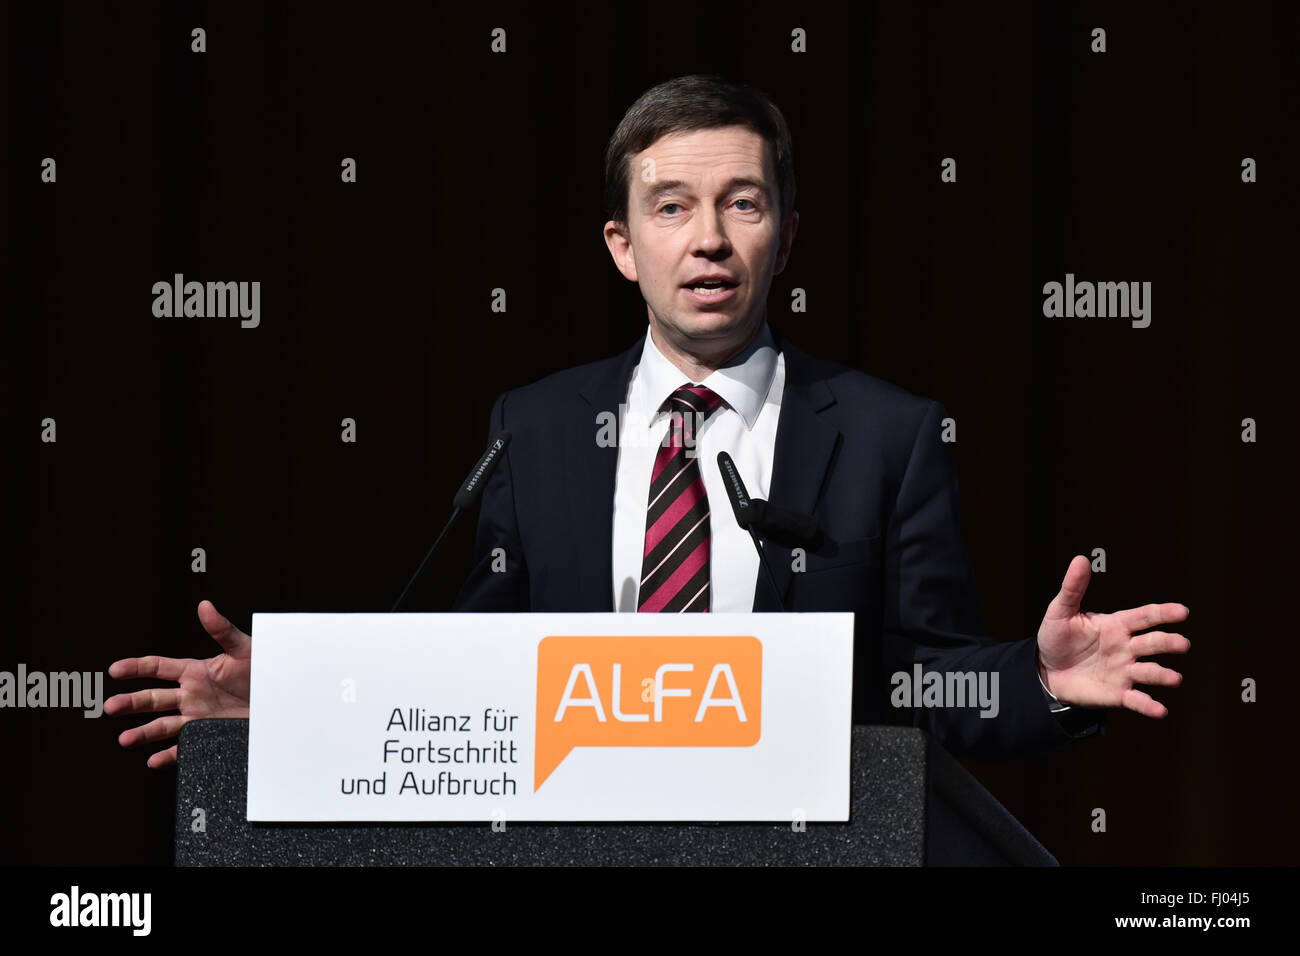 Ludwigshafen, Germany. 27th Feb, 2016. Party leader of the Allianz fuer Fortschritt und Aufbruch (Alfa, Alliance for Progress and Renewal), Bernd Lucke, speaking at the party conference in Ludwigshafen, Germany, 27 February 2016. PHOTO: UWE ANSPACH/DPA/Alamy Live News Stock Photo